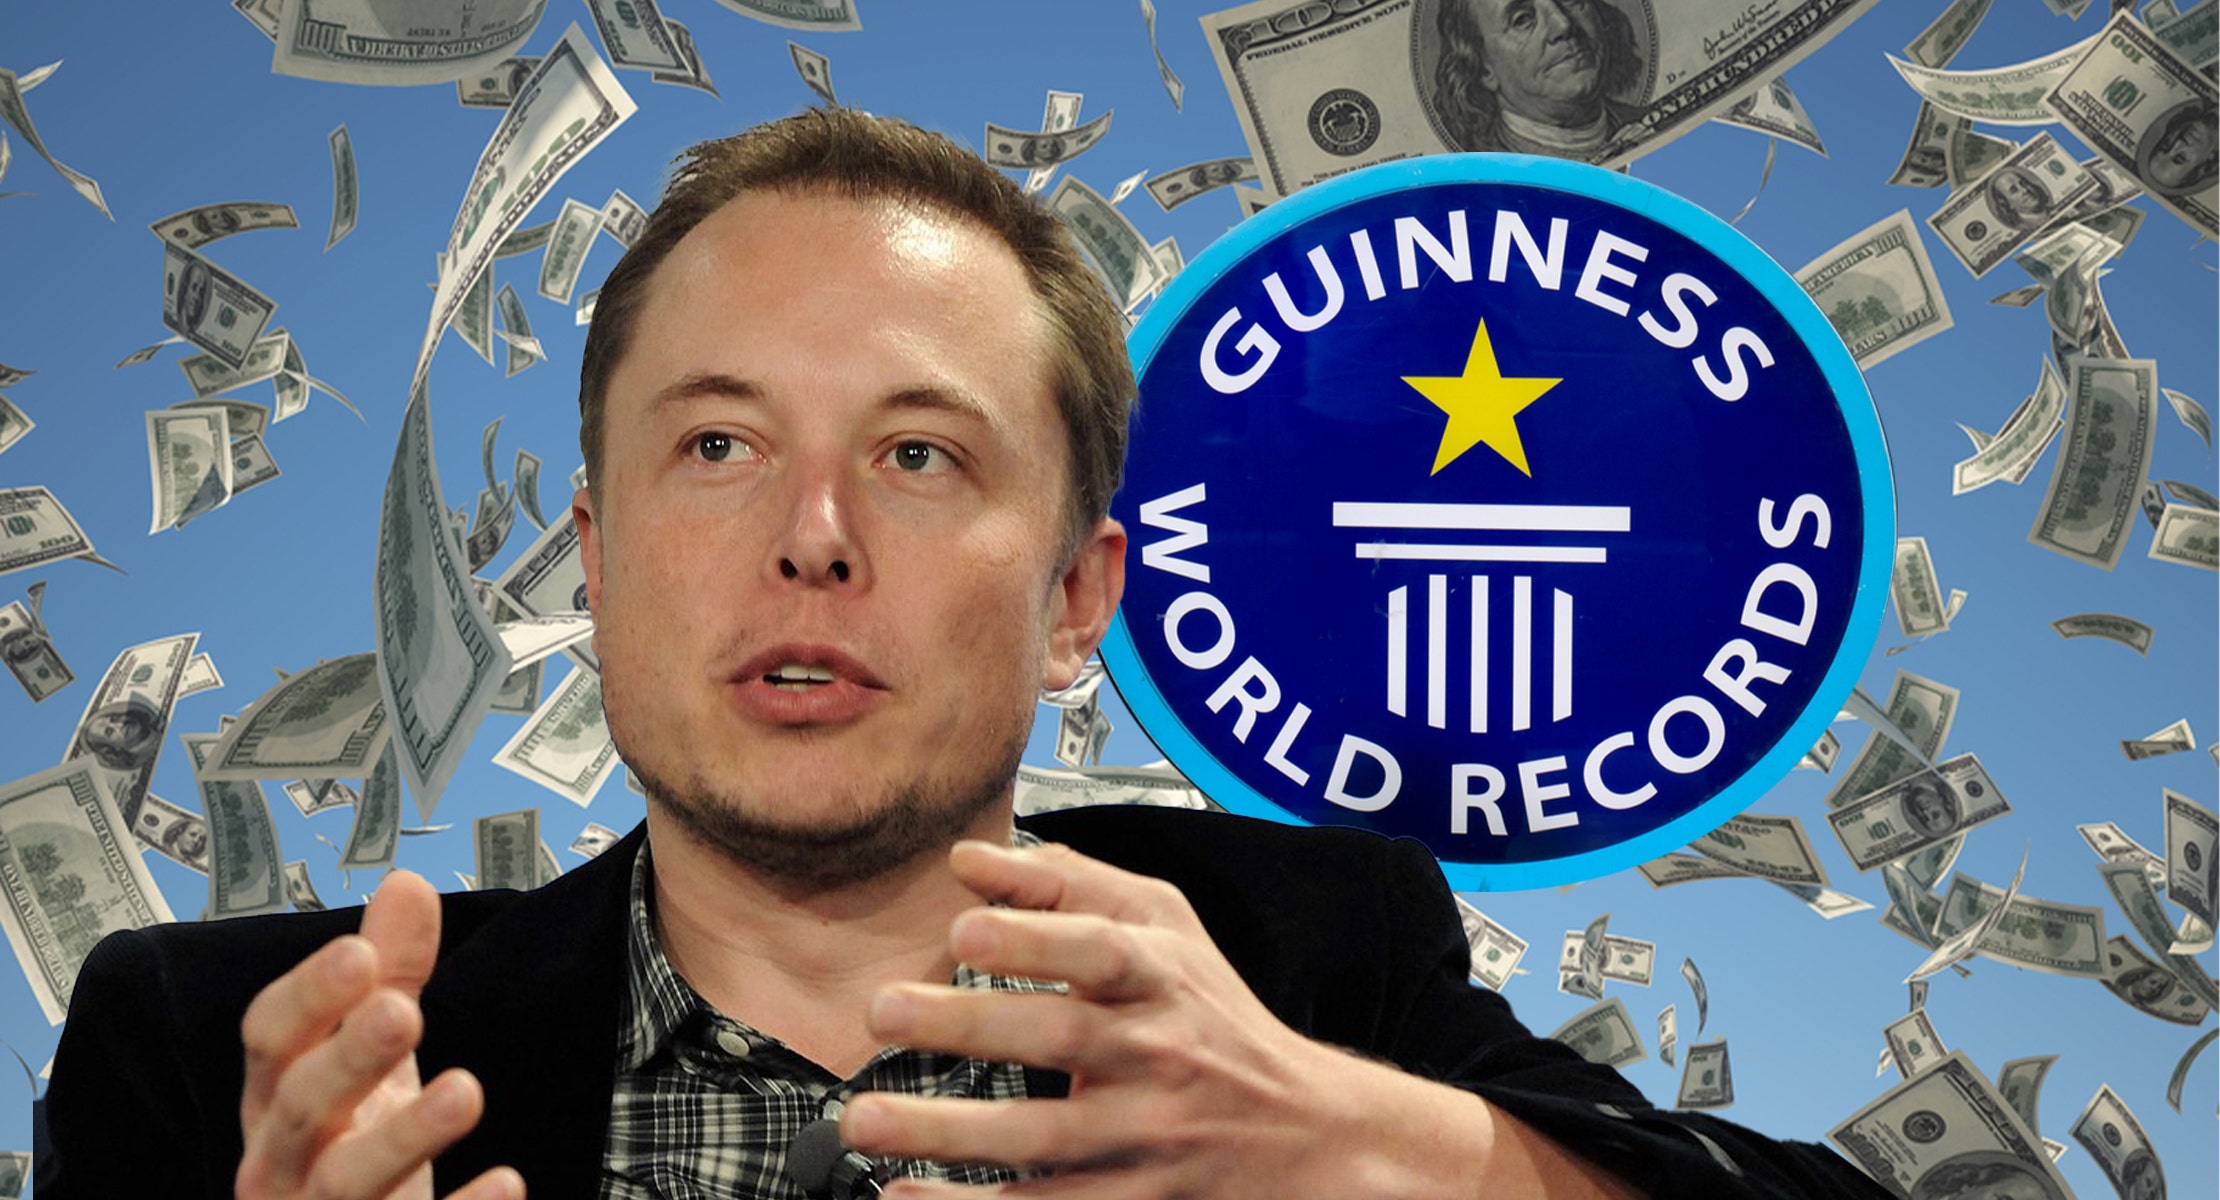 Elon Musk Wins A Guinness World Record — But He Likely Won't Be Celebrating